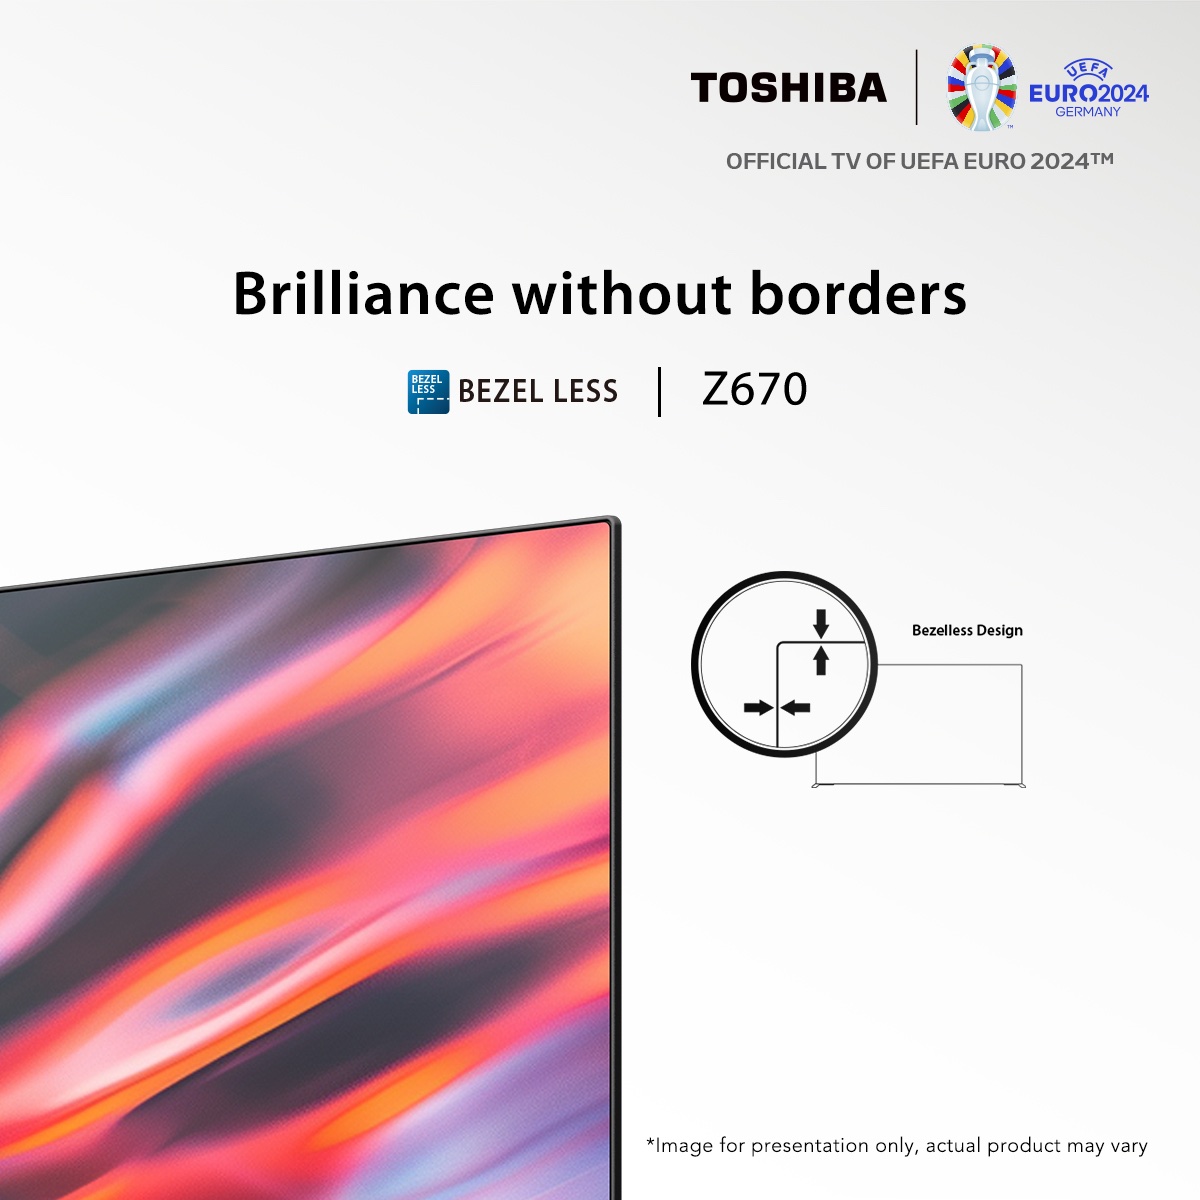 #ToshibaTV Z670 pushes the edges to new extremes for a truly brilliant display. Our reduced bezel design offers an enhanced, stylish experience. What would you love to see on this screen? Share below, hit 'Like' if you're into sleek designs. #BeRealCraftsmanship